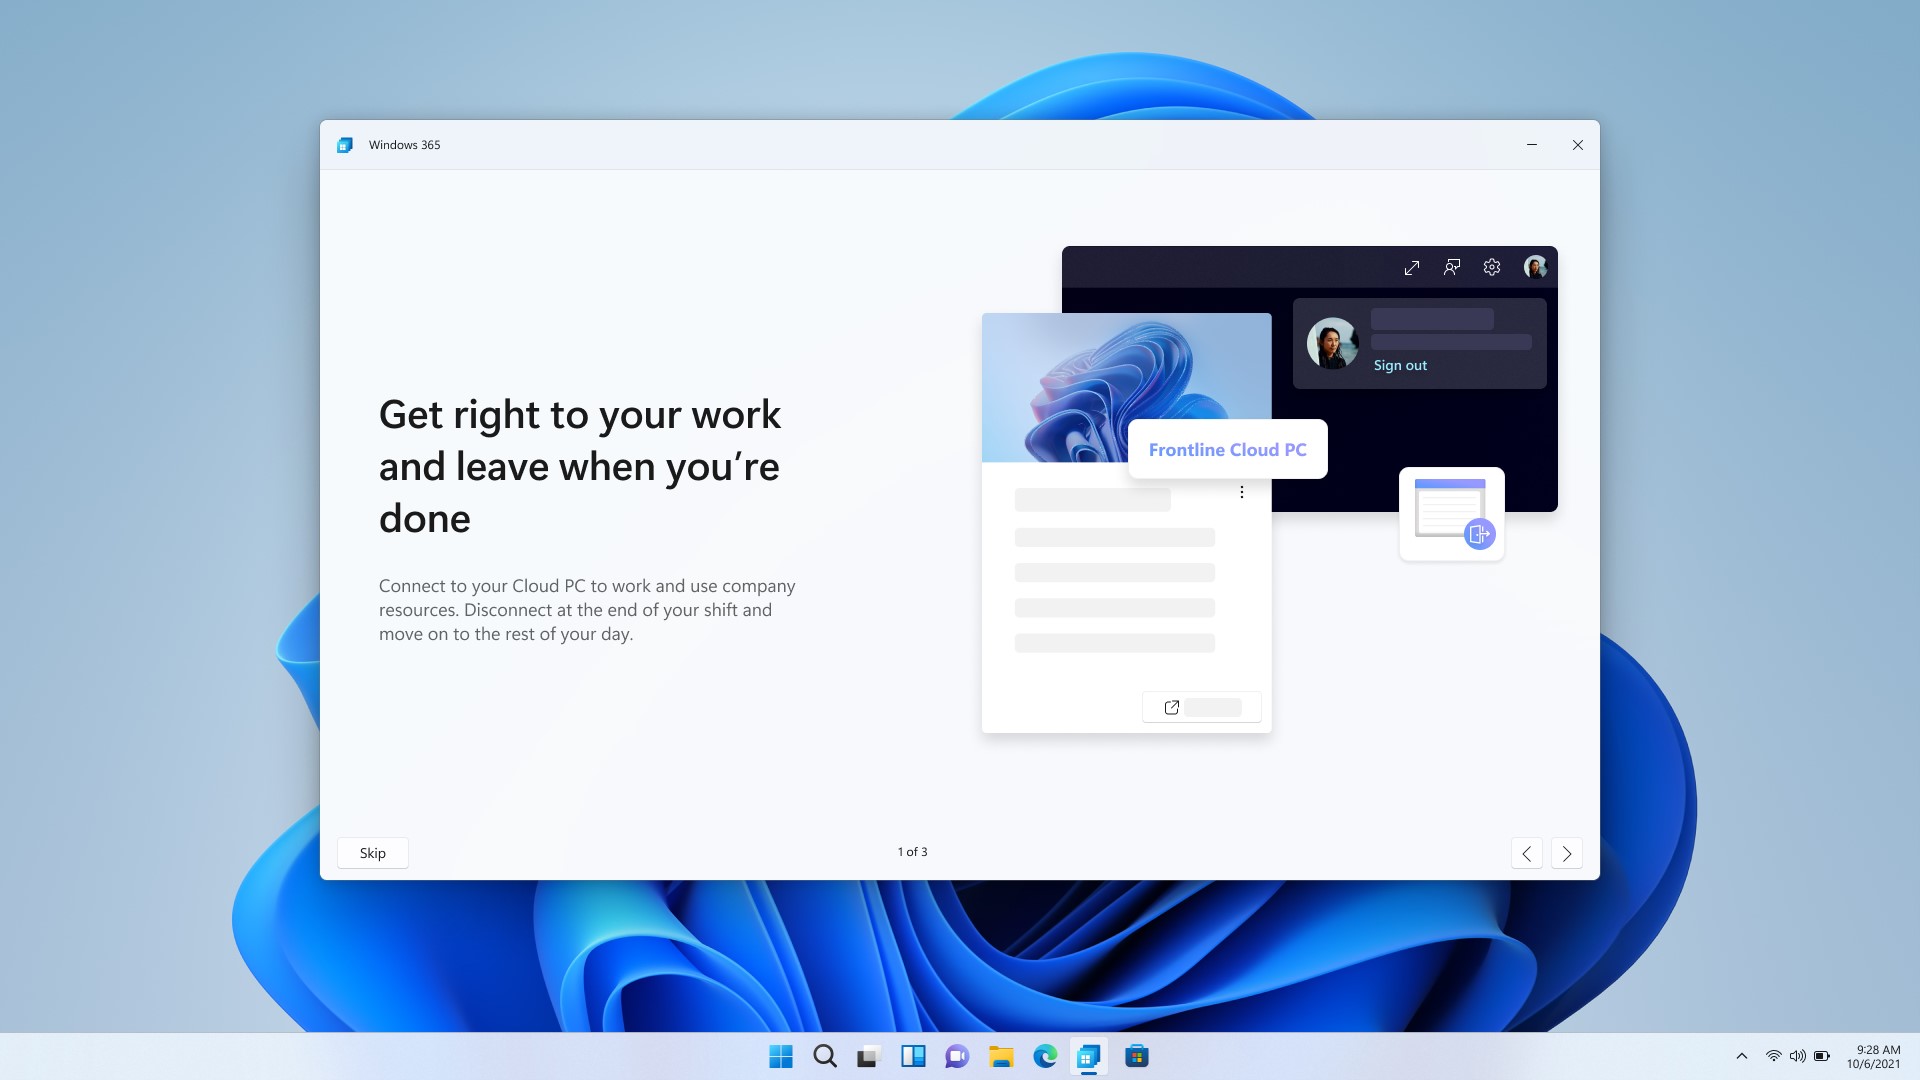 Frontline Cloud PC user interface, along with text headed "Get right to your work and leave when you're done"